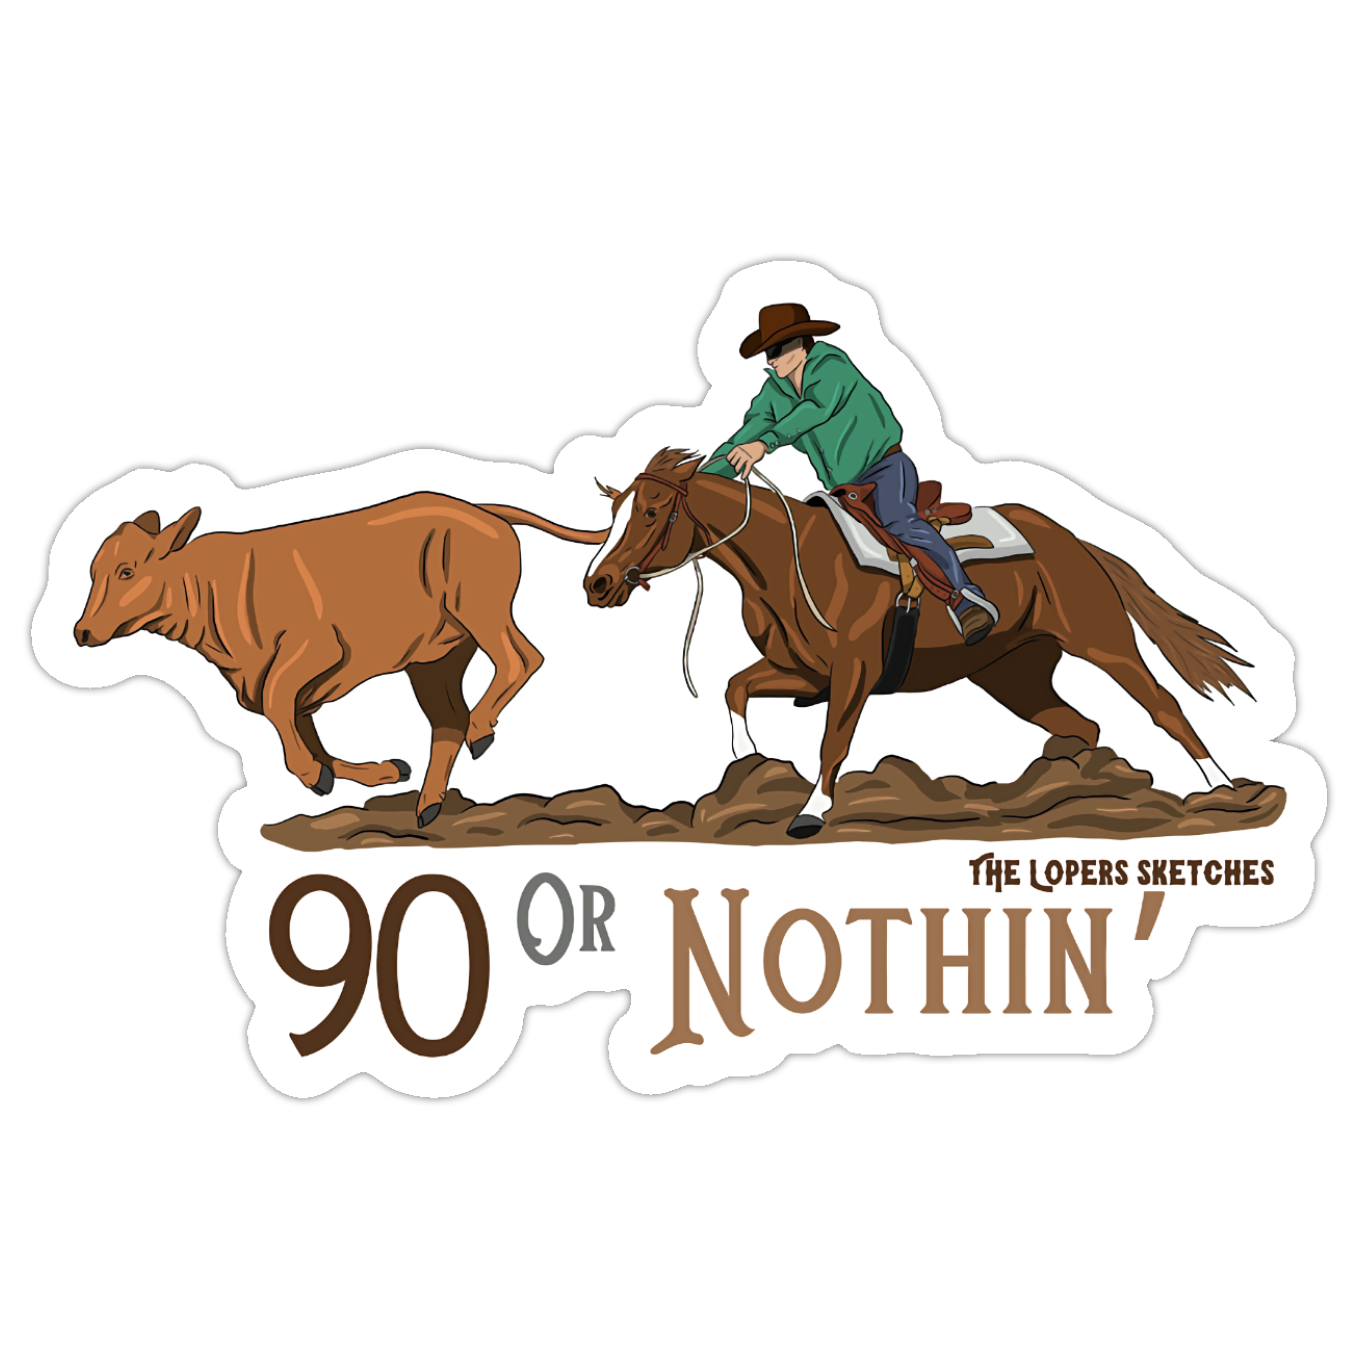 90 Or Nothin'